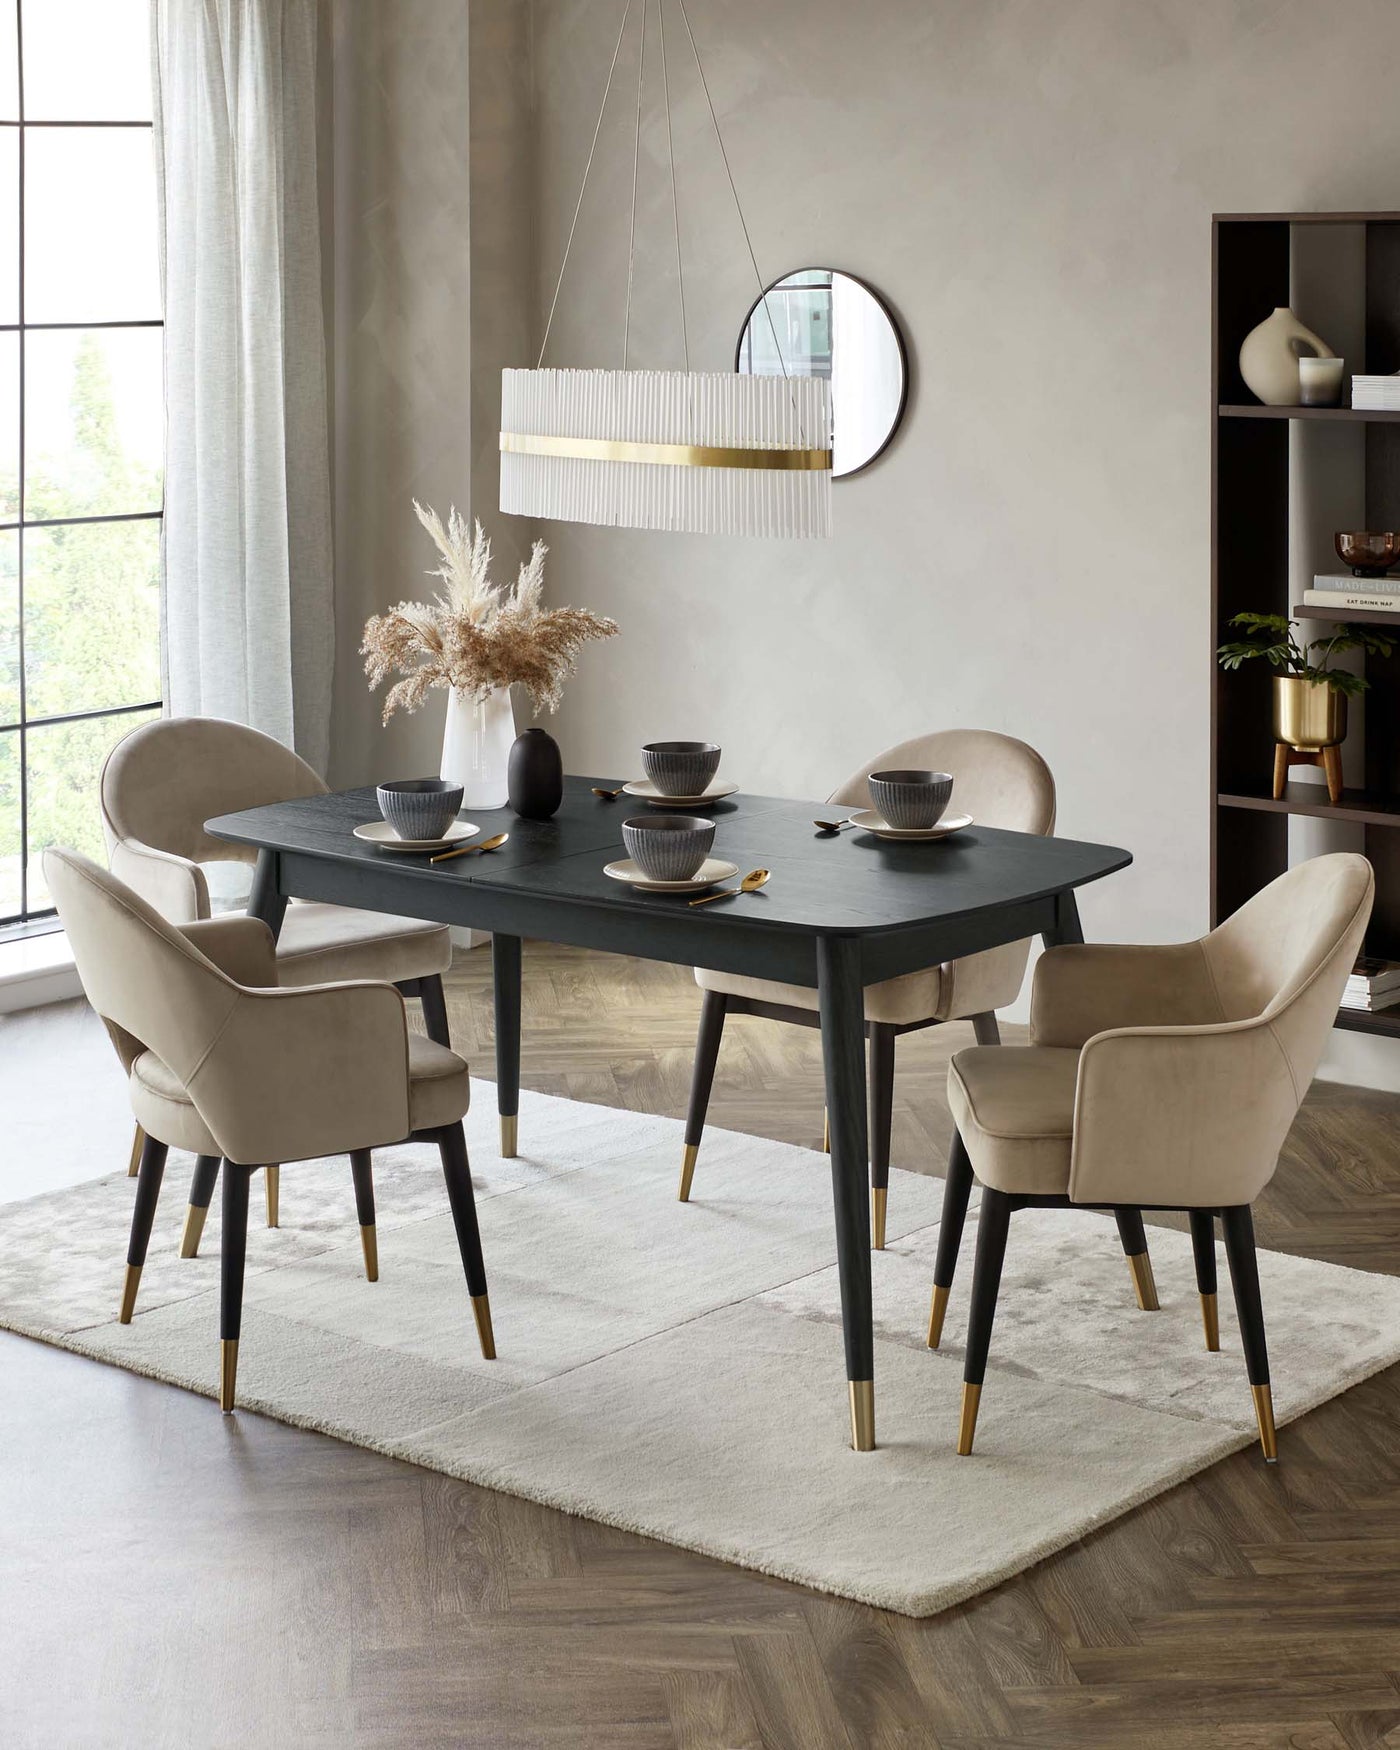 Elegant dining room furniture set featuring a rectangular matte black table with tapered legs accentuated with gold tips, surrounded by four plush beige upholstered chairs with curved backrests and gold accents on the legs. The set sits on a large off-white area rug, providing a sophisticated and modern aesthetic.